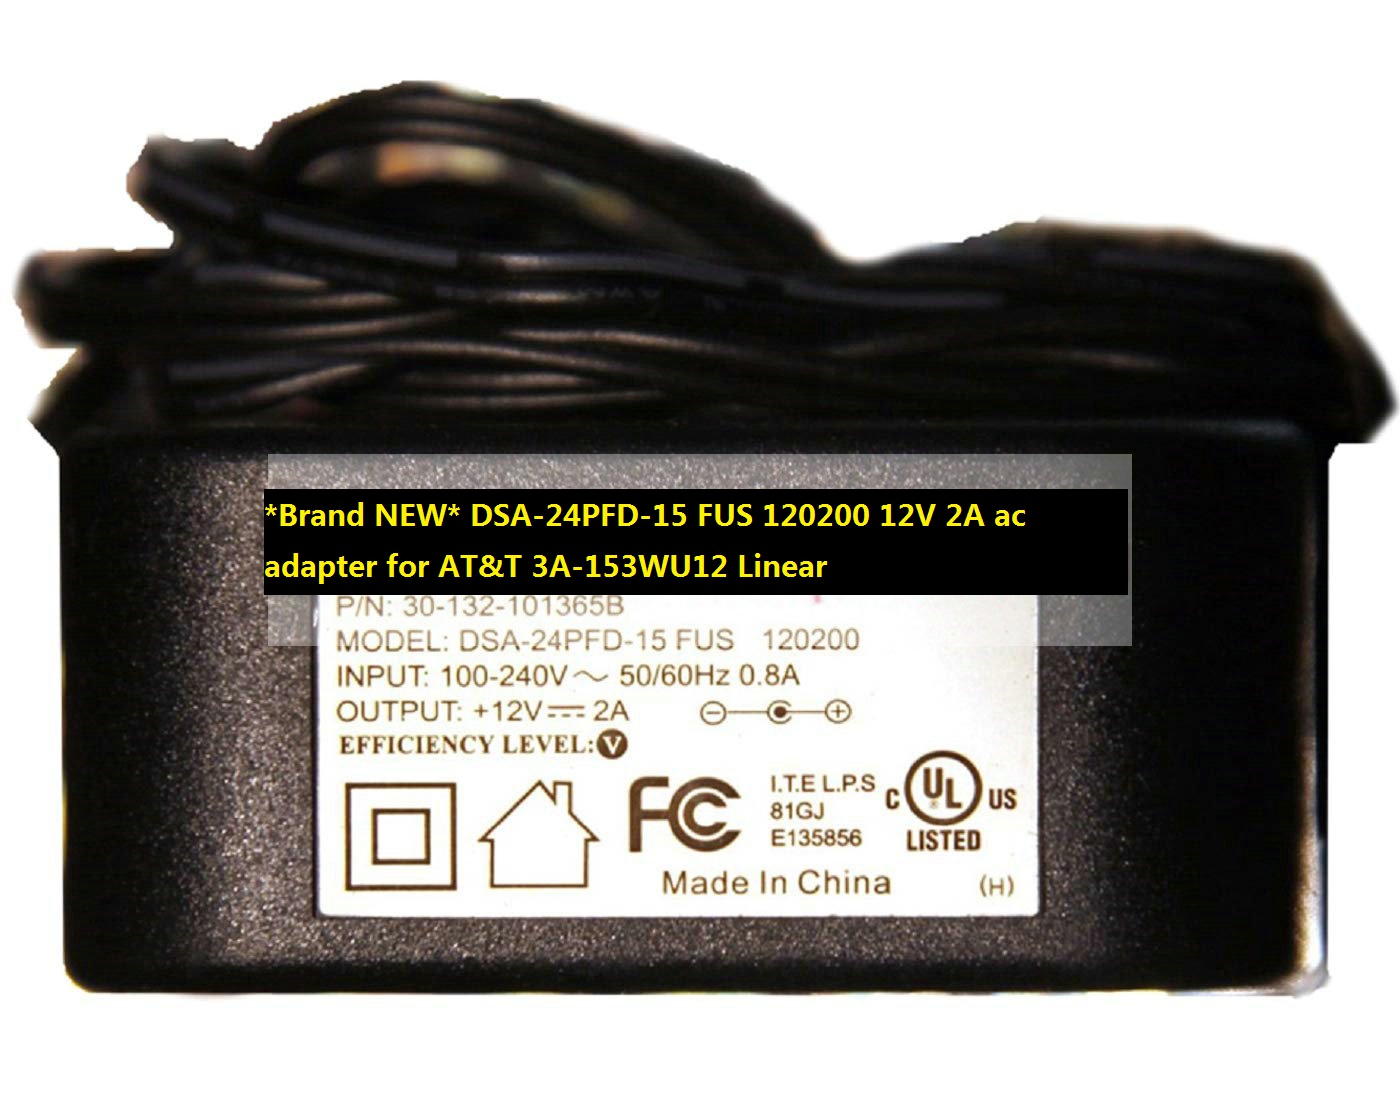 *Brand NEW* DSA-24PFD-15 FUS 120200 12V 2A ac adapter for AT&T 3A-153WU12 Linear